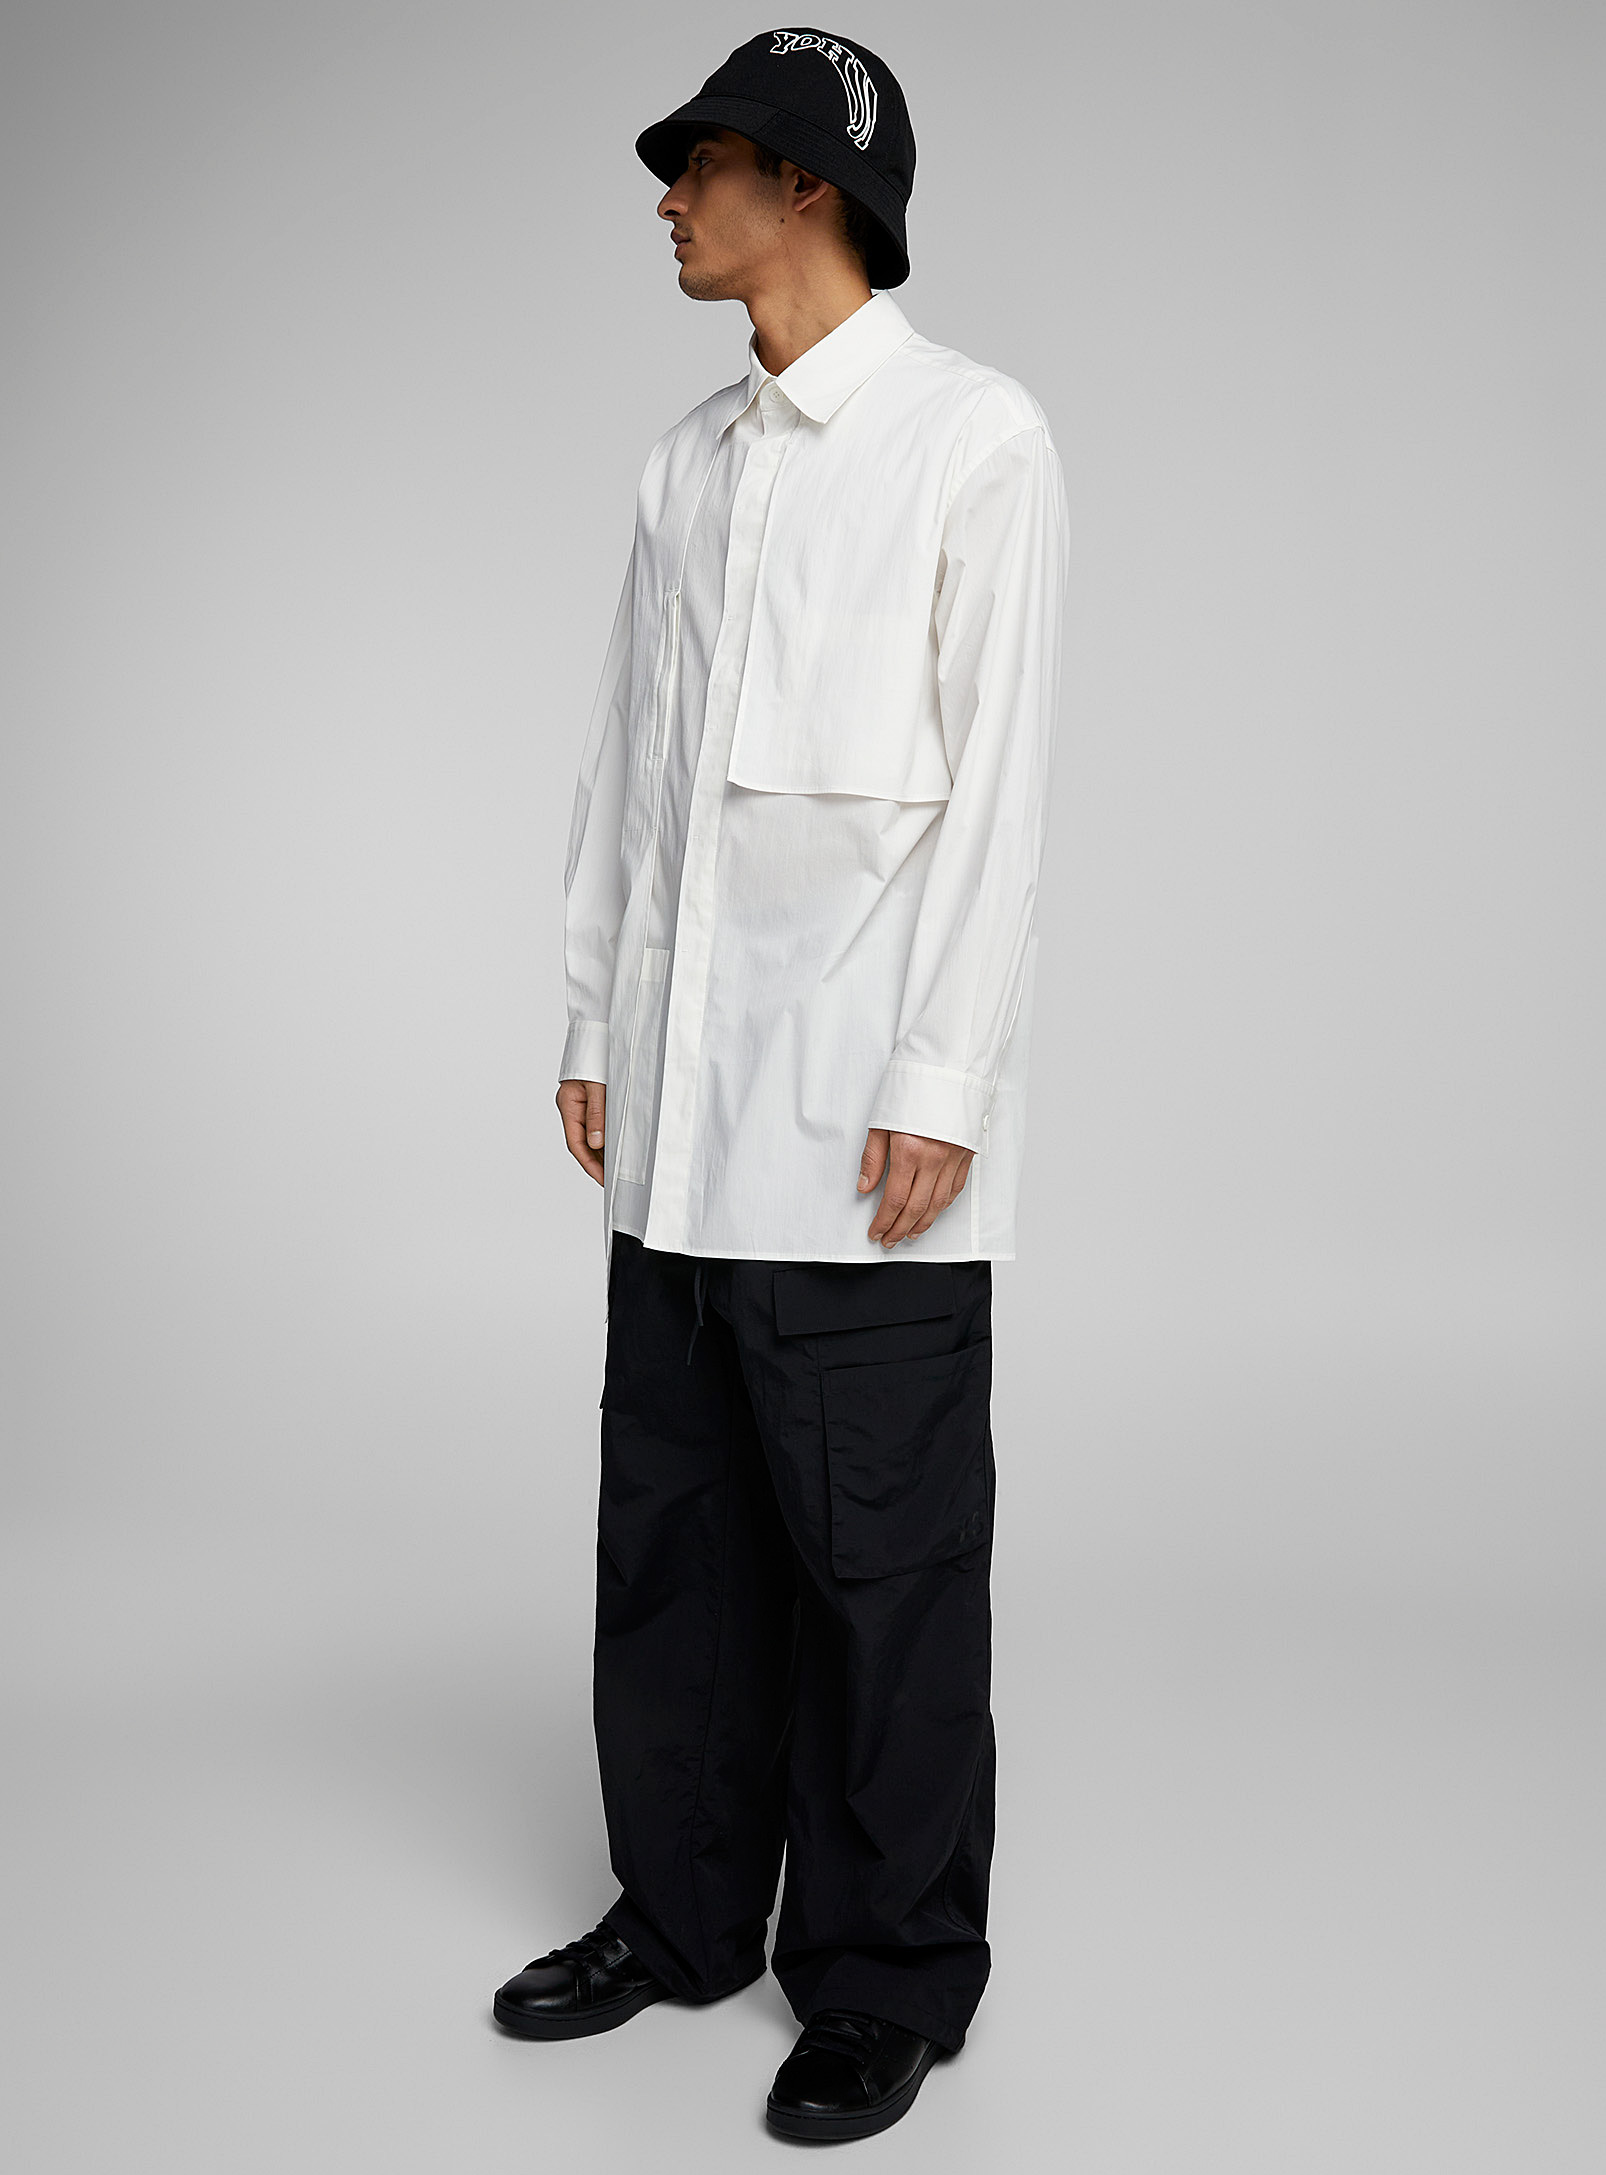 Y-3 Superimposed Panels Asymmetrical Shirt In White